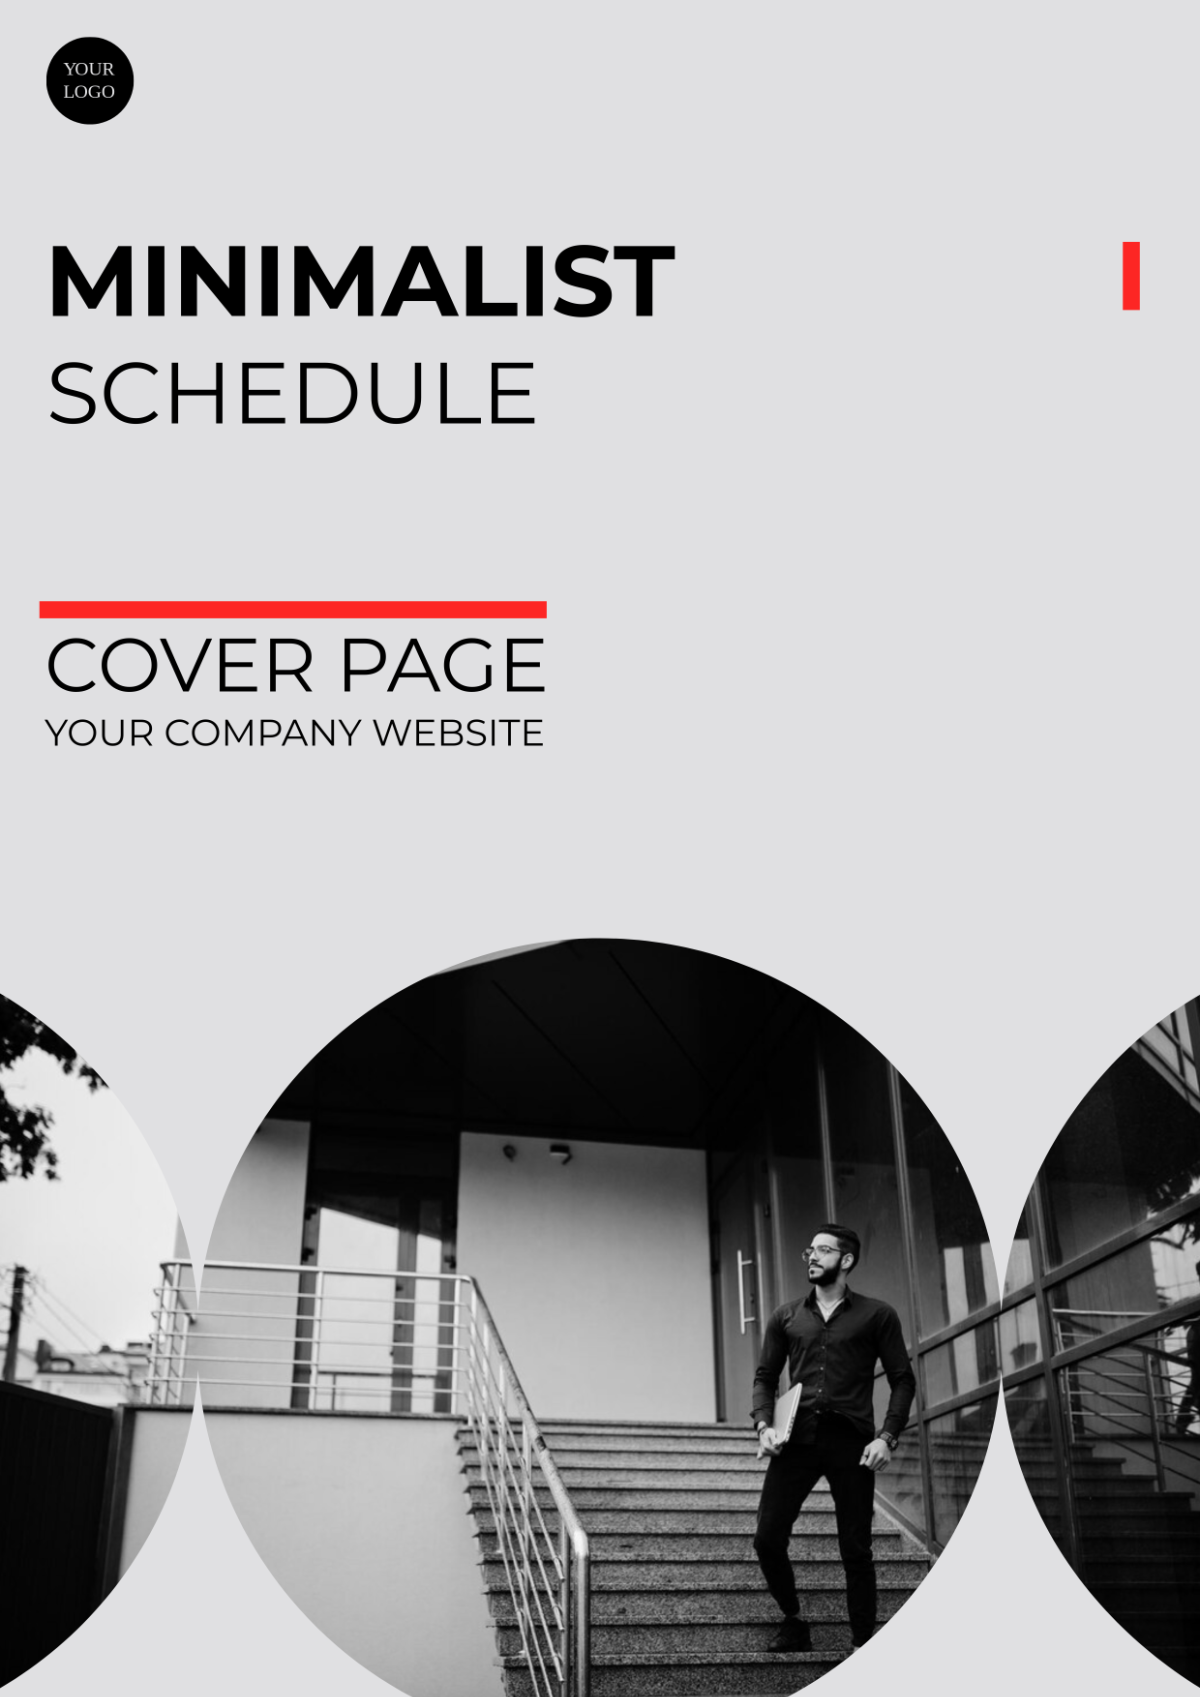 Minimalist Schedule Cover Page